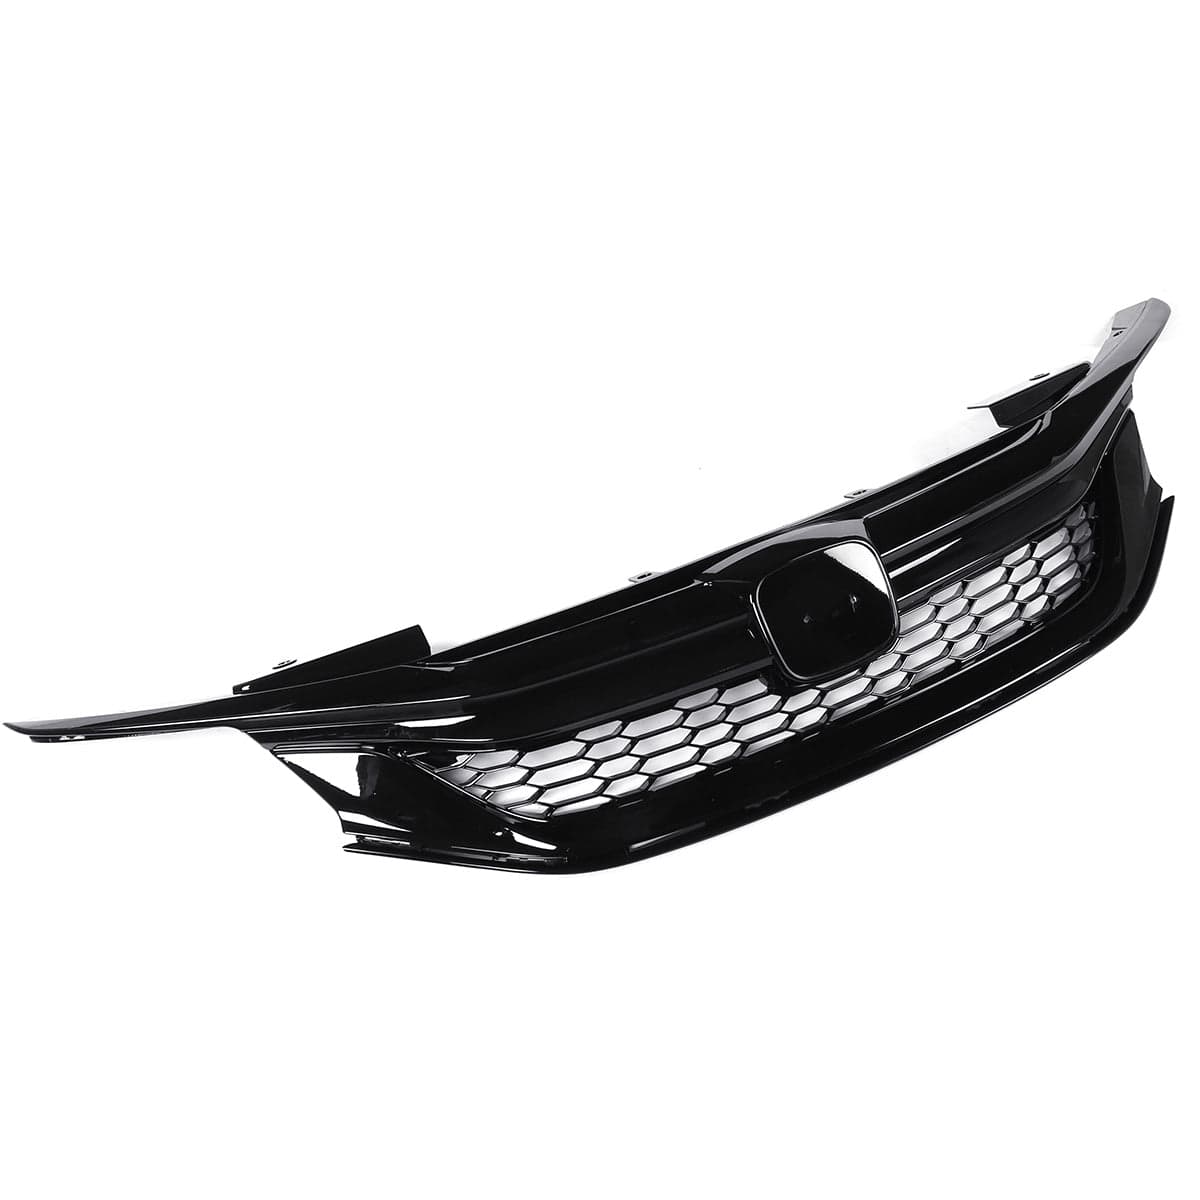 TunerGenix Front Grille Front Grille for Honda Accord 16-17